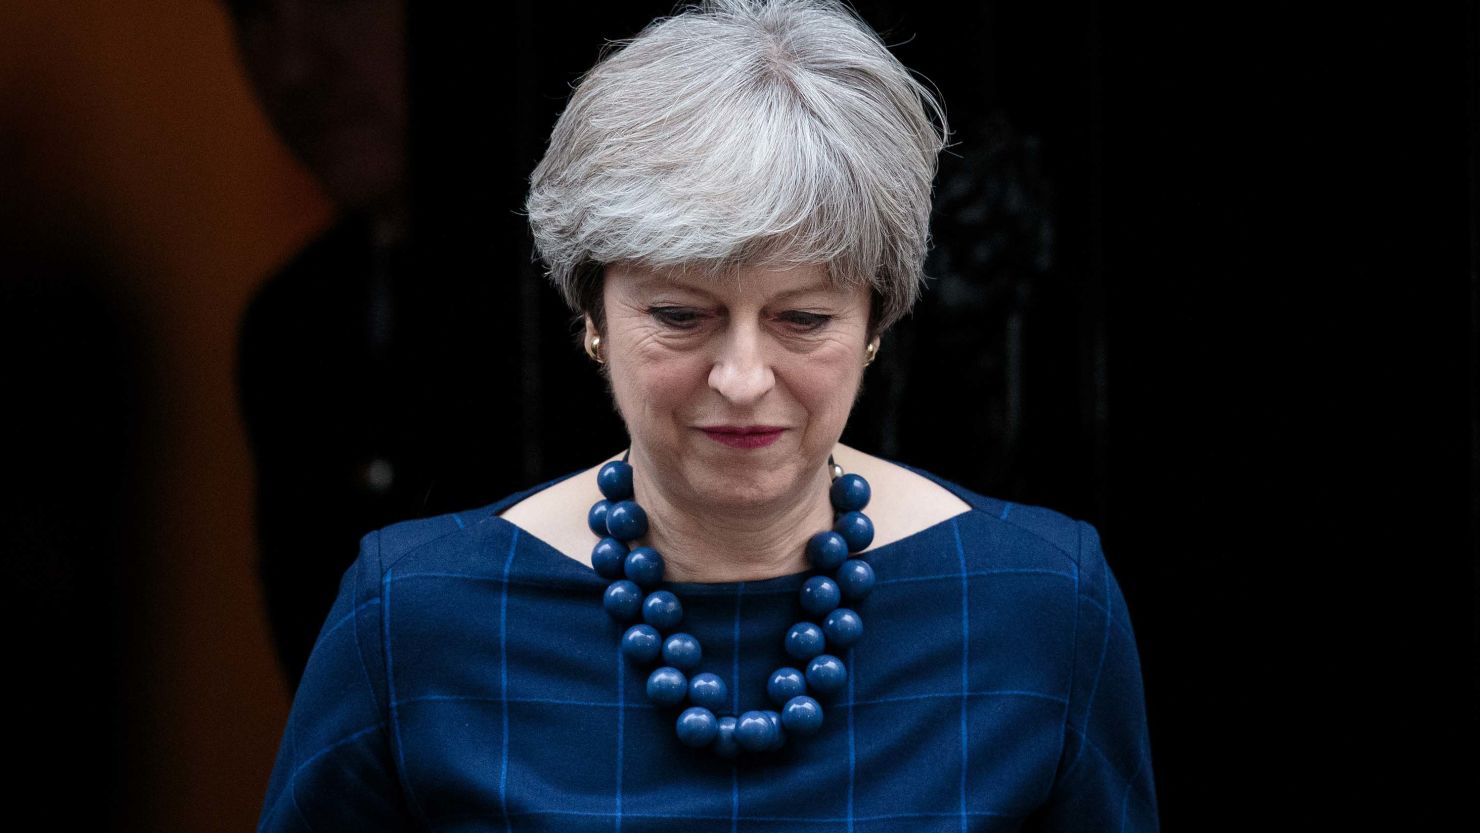 UK Prime Minister Theresa May, who was Home Secretary at the time the allegations of cheating emerged, will face renewed questions following the publication of the report Tuesday.